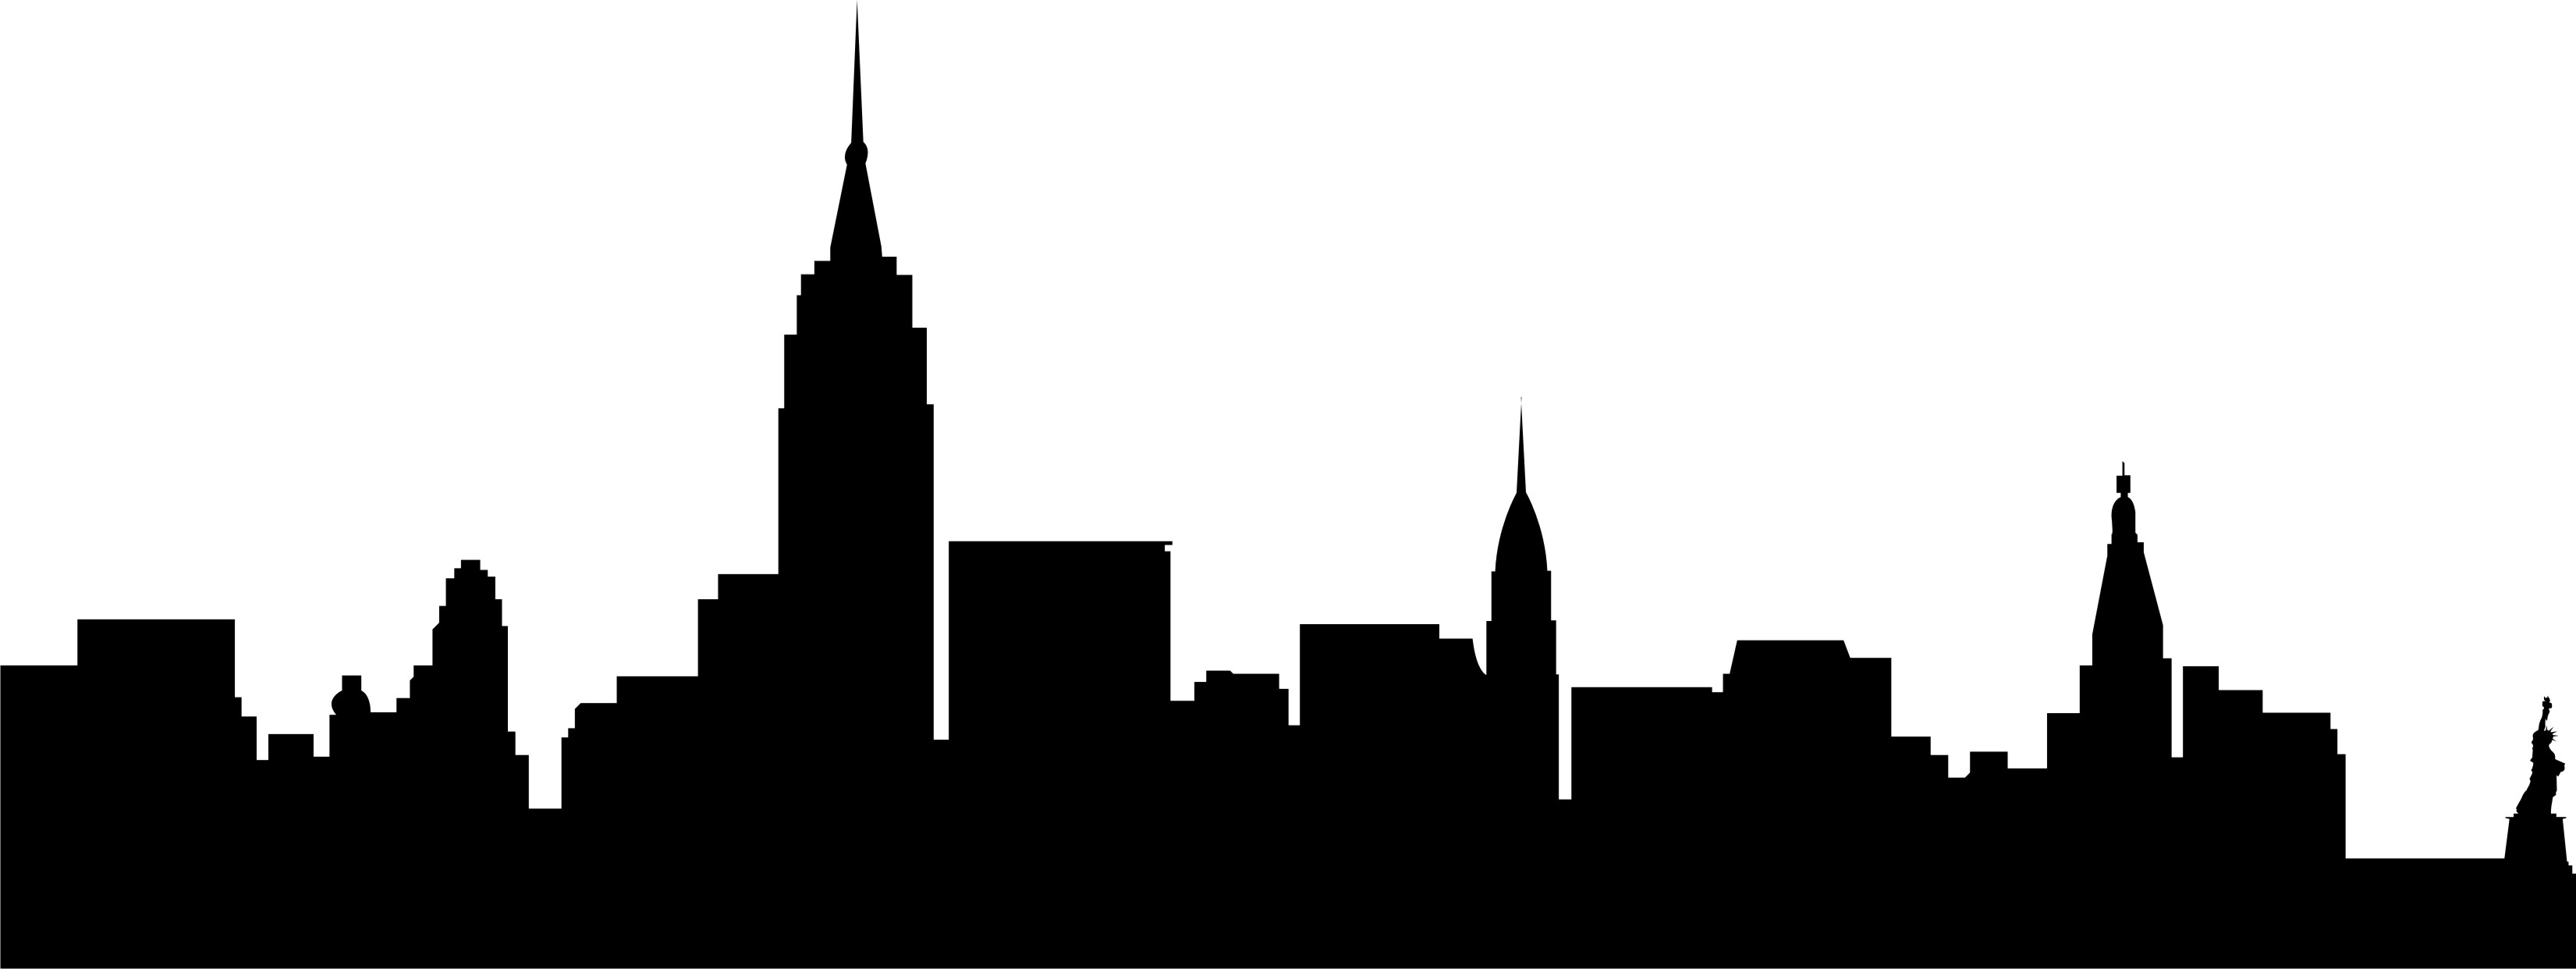 Cityscape free image at vector clip art image 